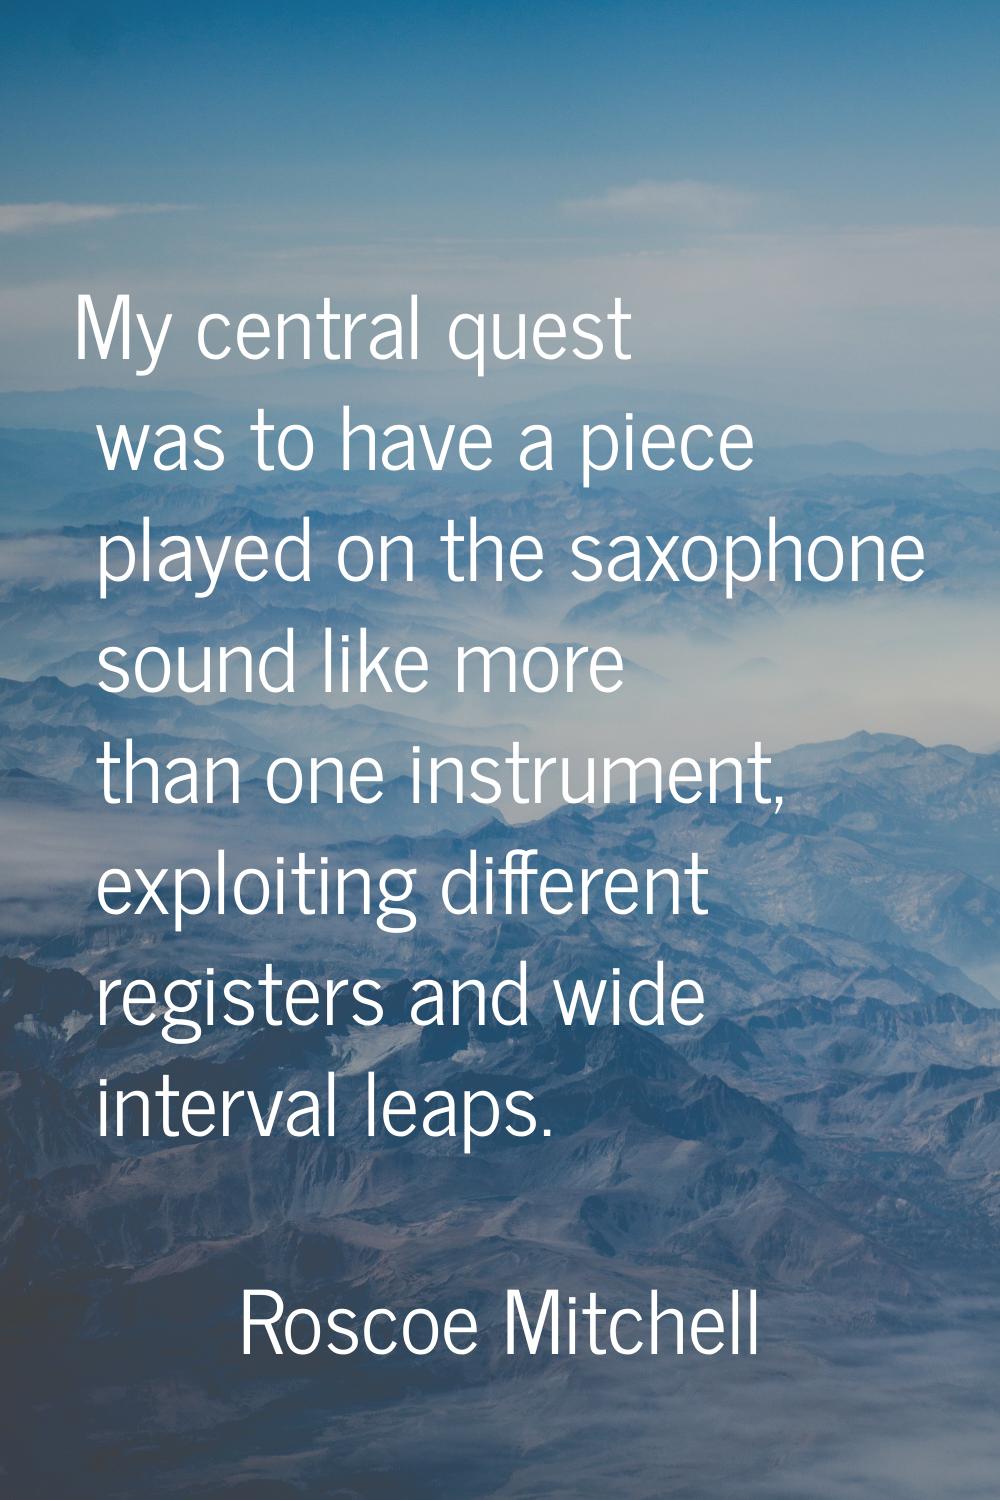 My central quest was to have a piece played on the saxophone sound like more than one instrument, e